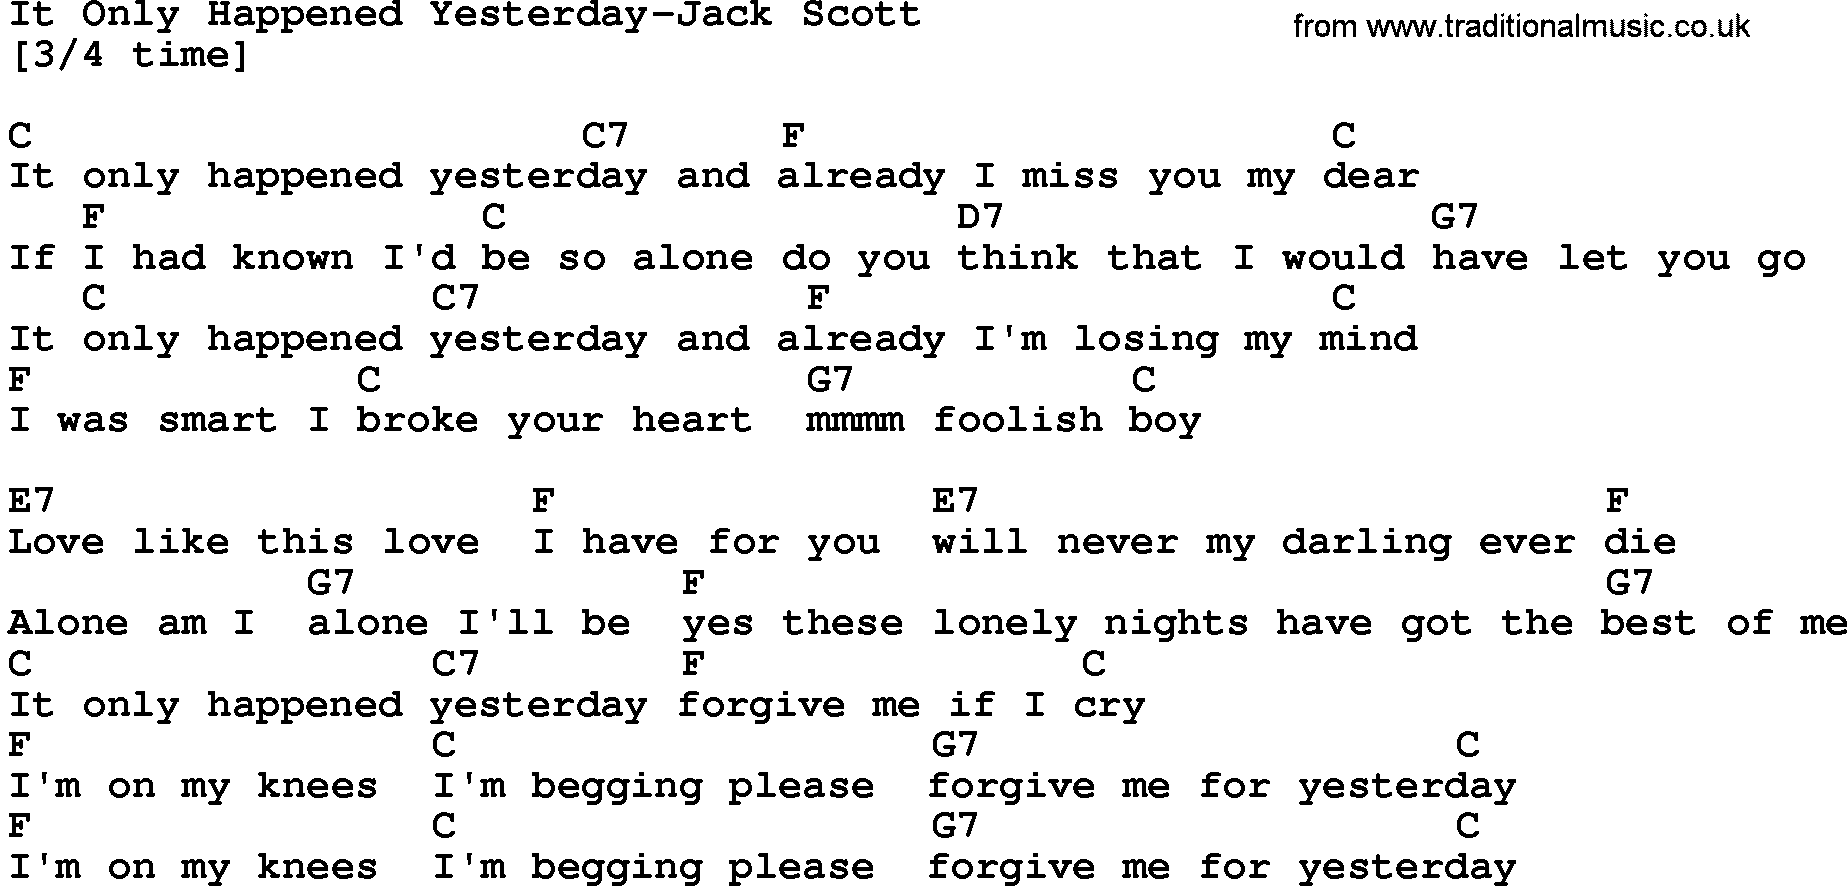 Country music song: It Only Happened Yesterday-Jack Scott lyrics and chords